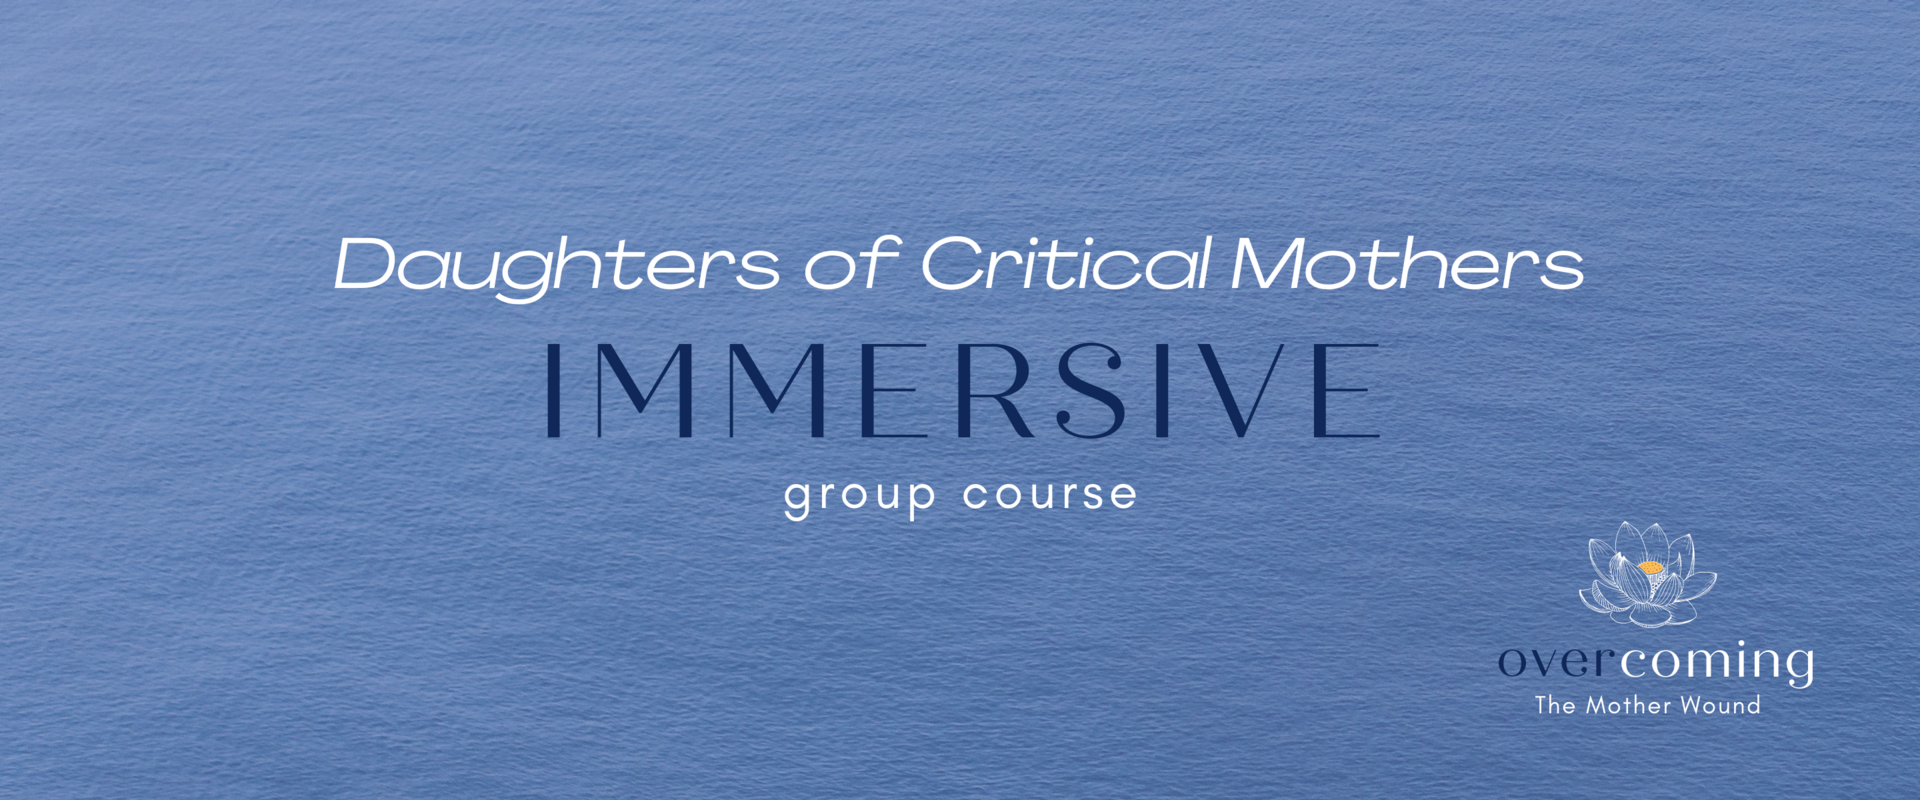 Daughters of Critical Mothers Immersive Group Course